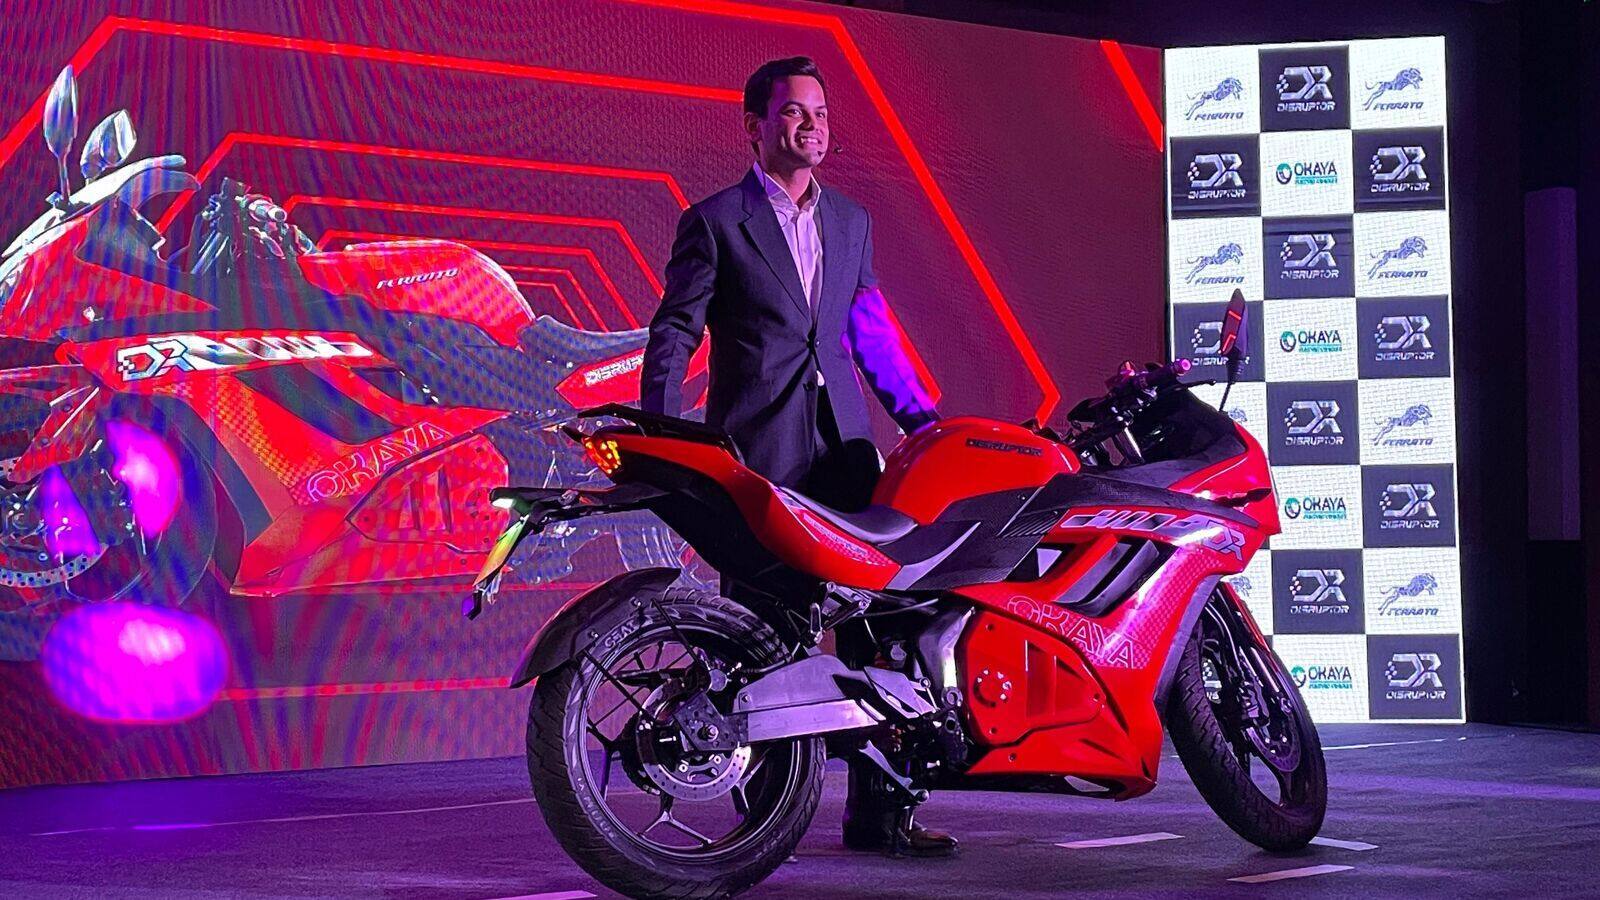 Ferrato Disruptor e-bike, with 129km range, launched at ₹1.60 lakh